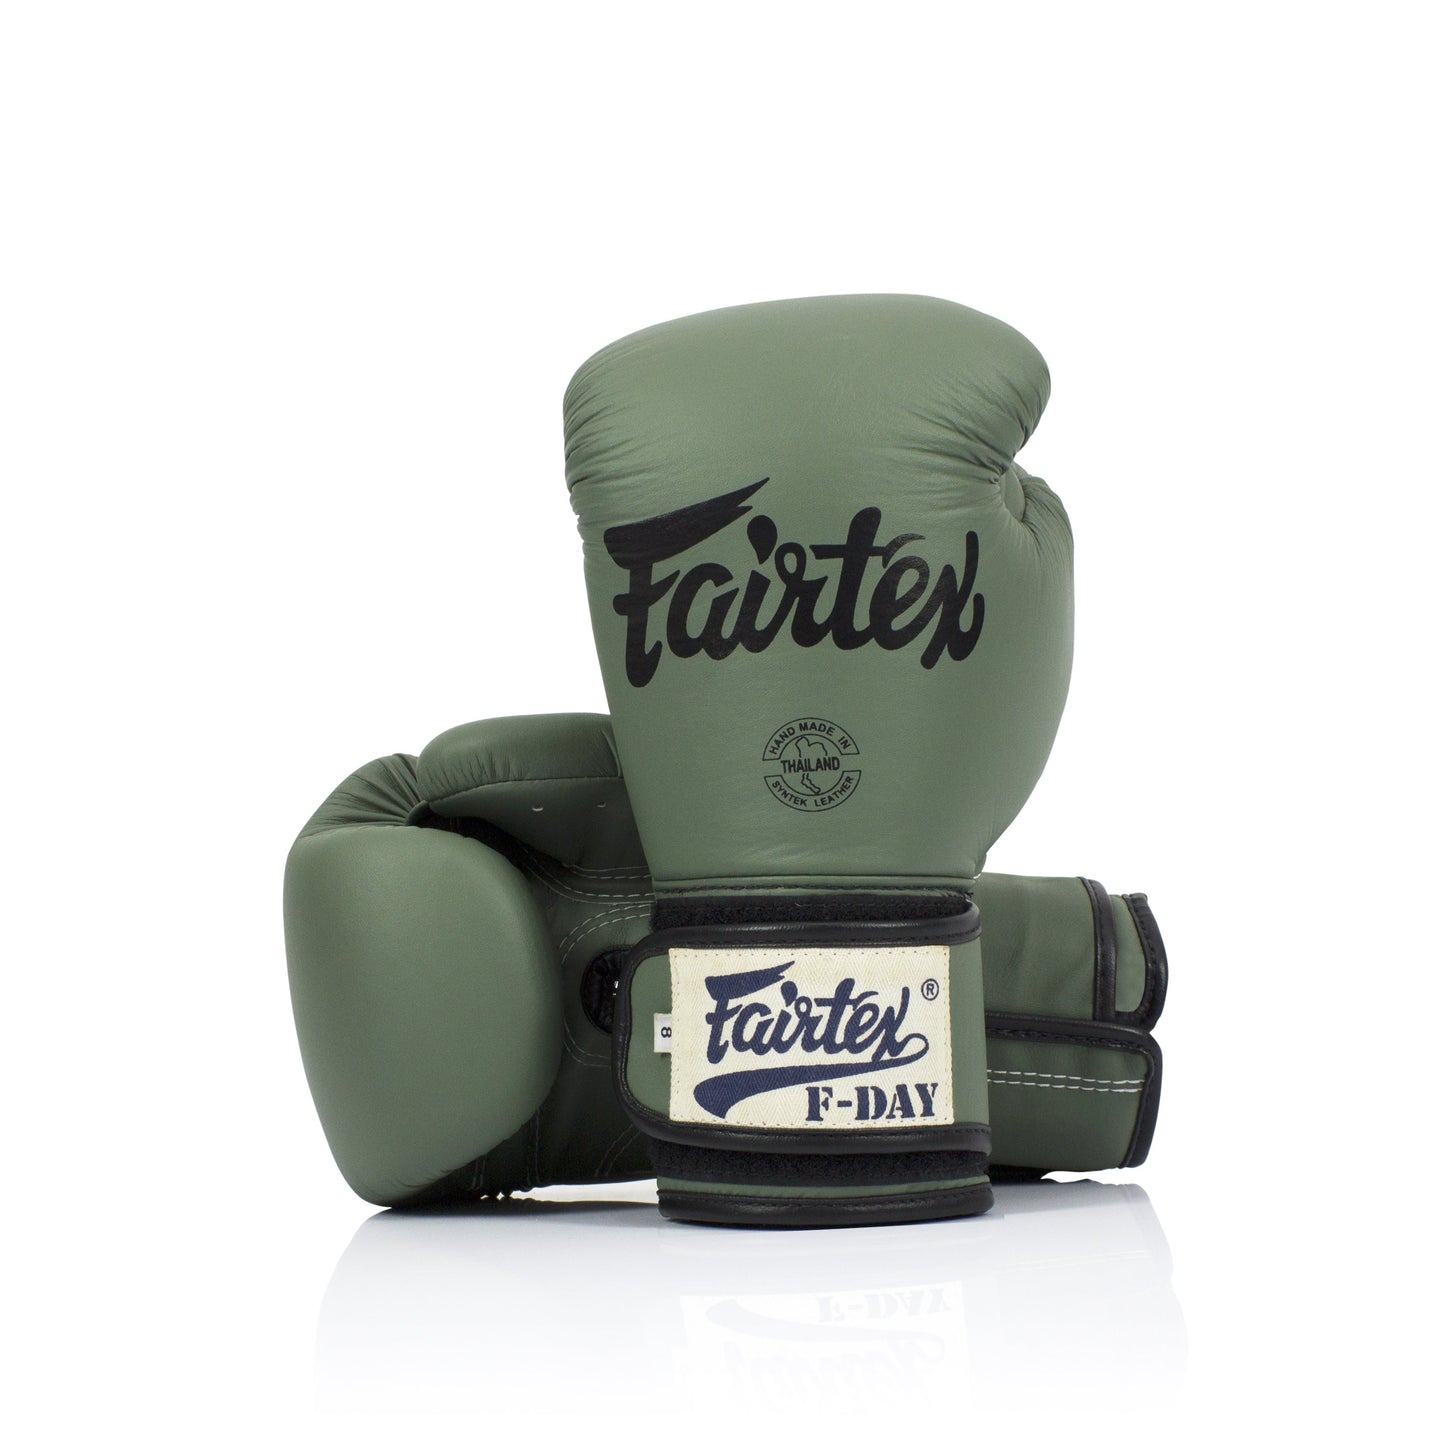 Fairtex Boxing Gloves BGV11 "Father's Day" Limited Edition Gloves without box Fairtex